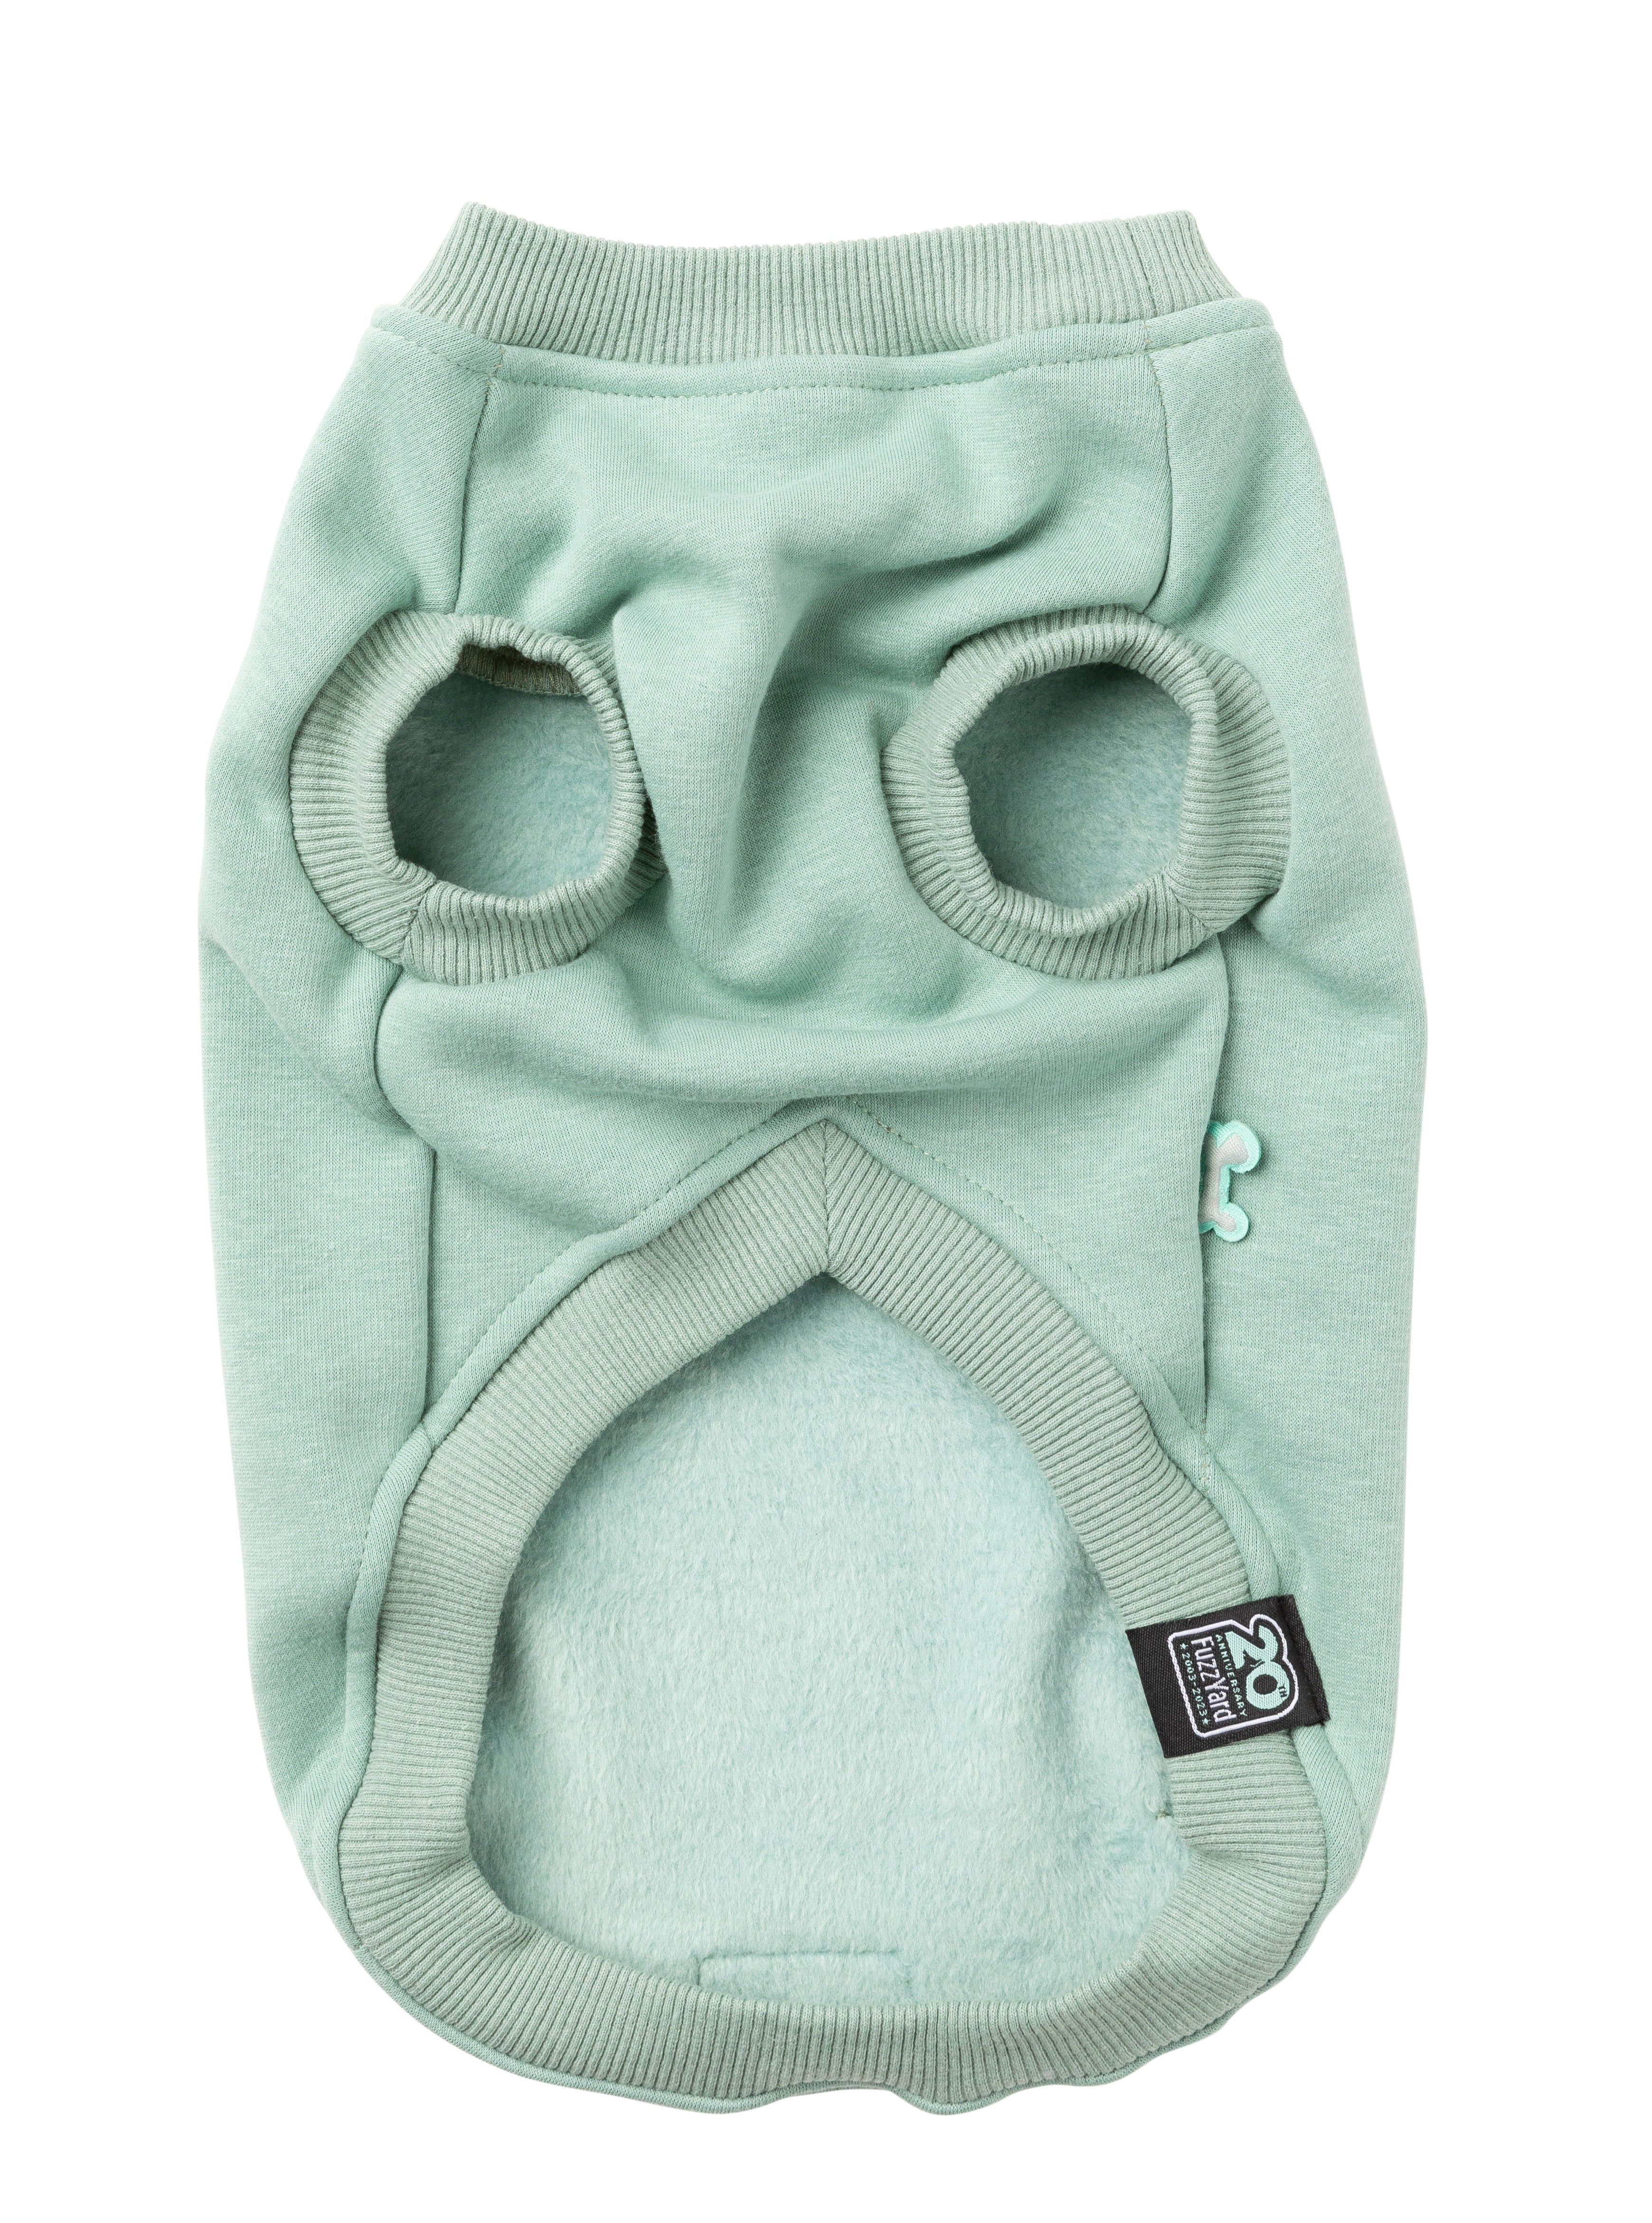 Allday Sweater - Mint - SPECIAL OFFER!